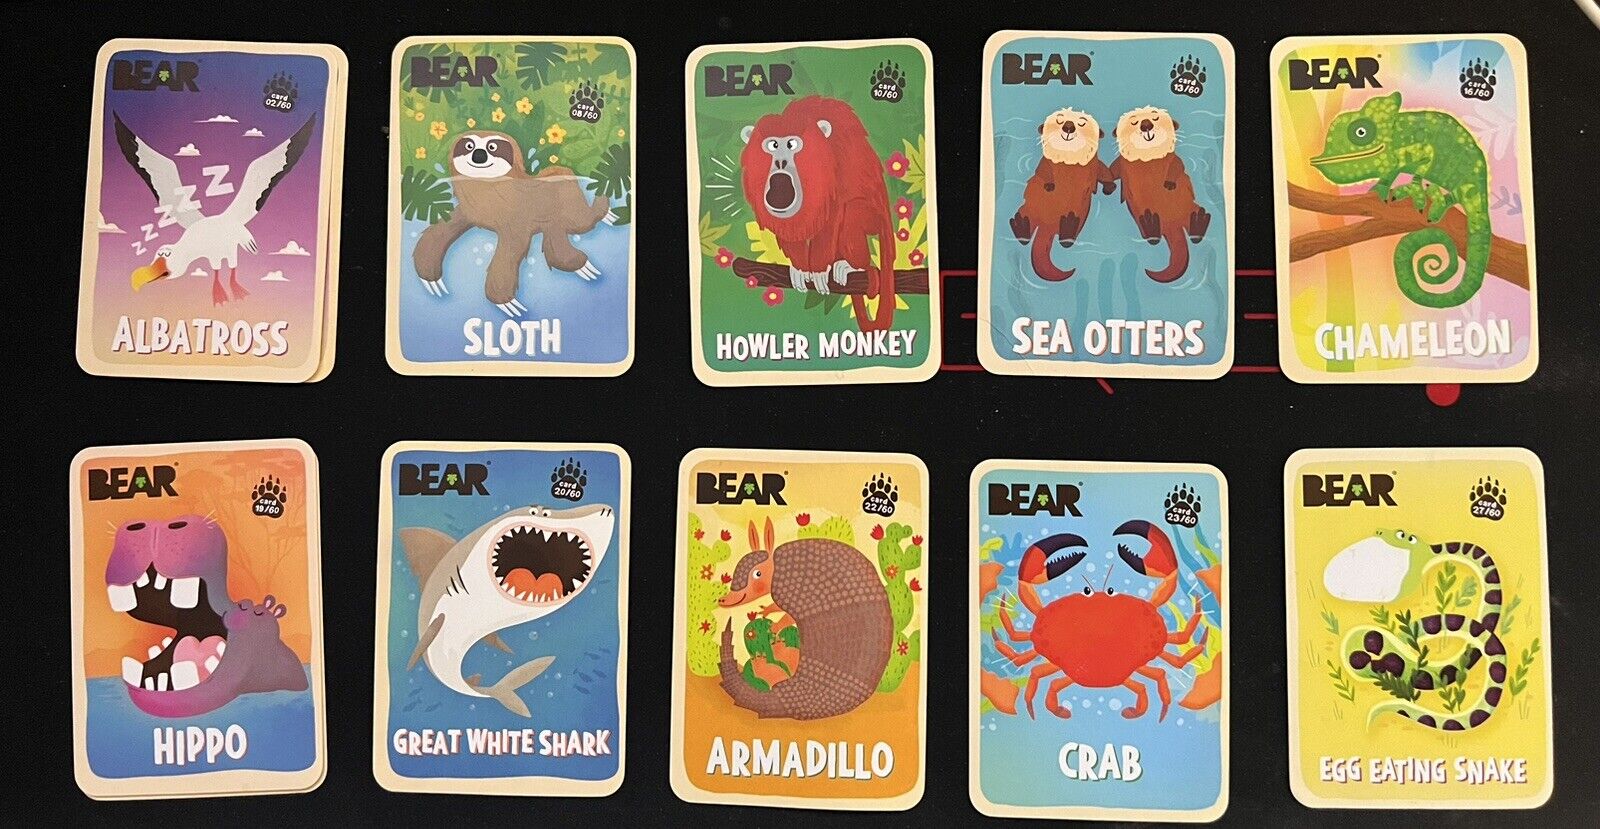 BEAR FRUIT ROLLS SNACK ANIMAL COLLECTIBLE CARDS - SURFACE CLEANED VARIOUS